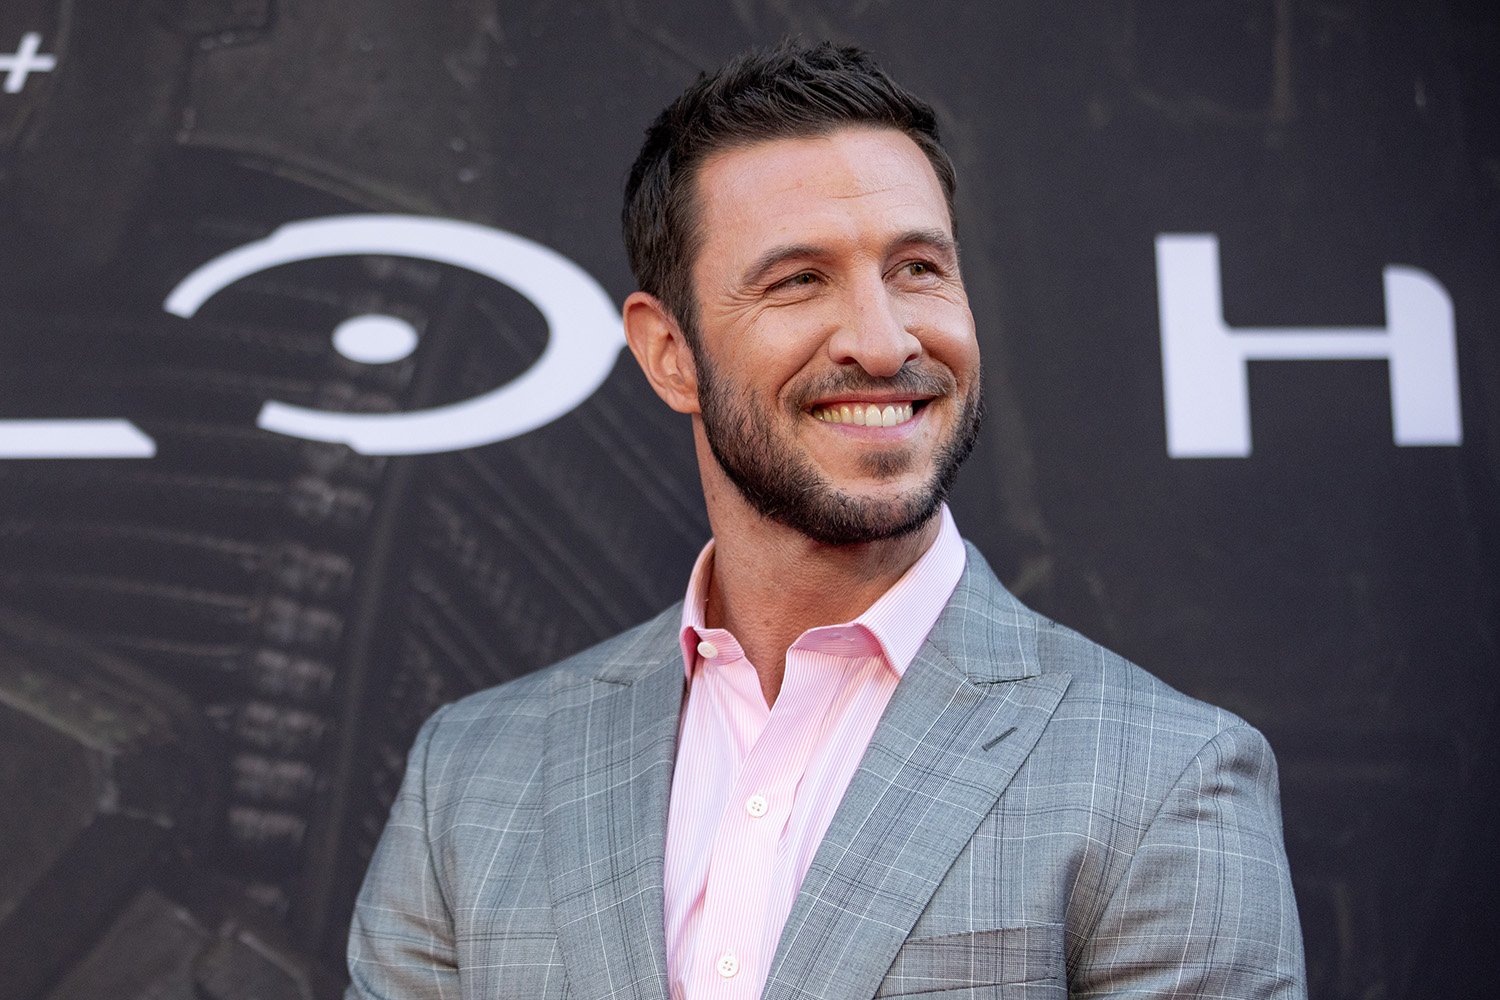 Halo star Pablo Schreiber, who plays Master Chief, at the show's premiere